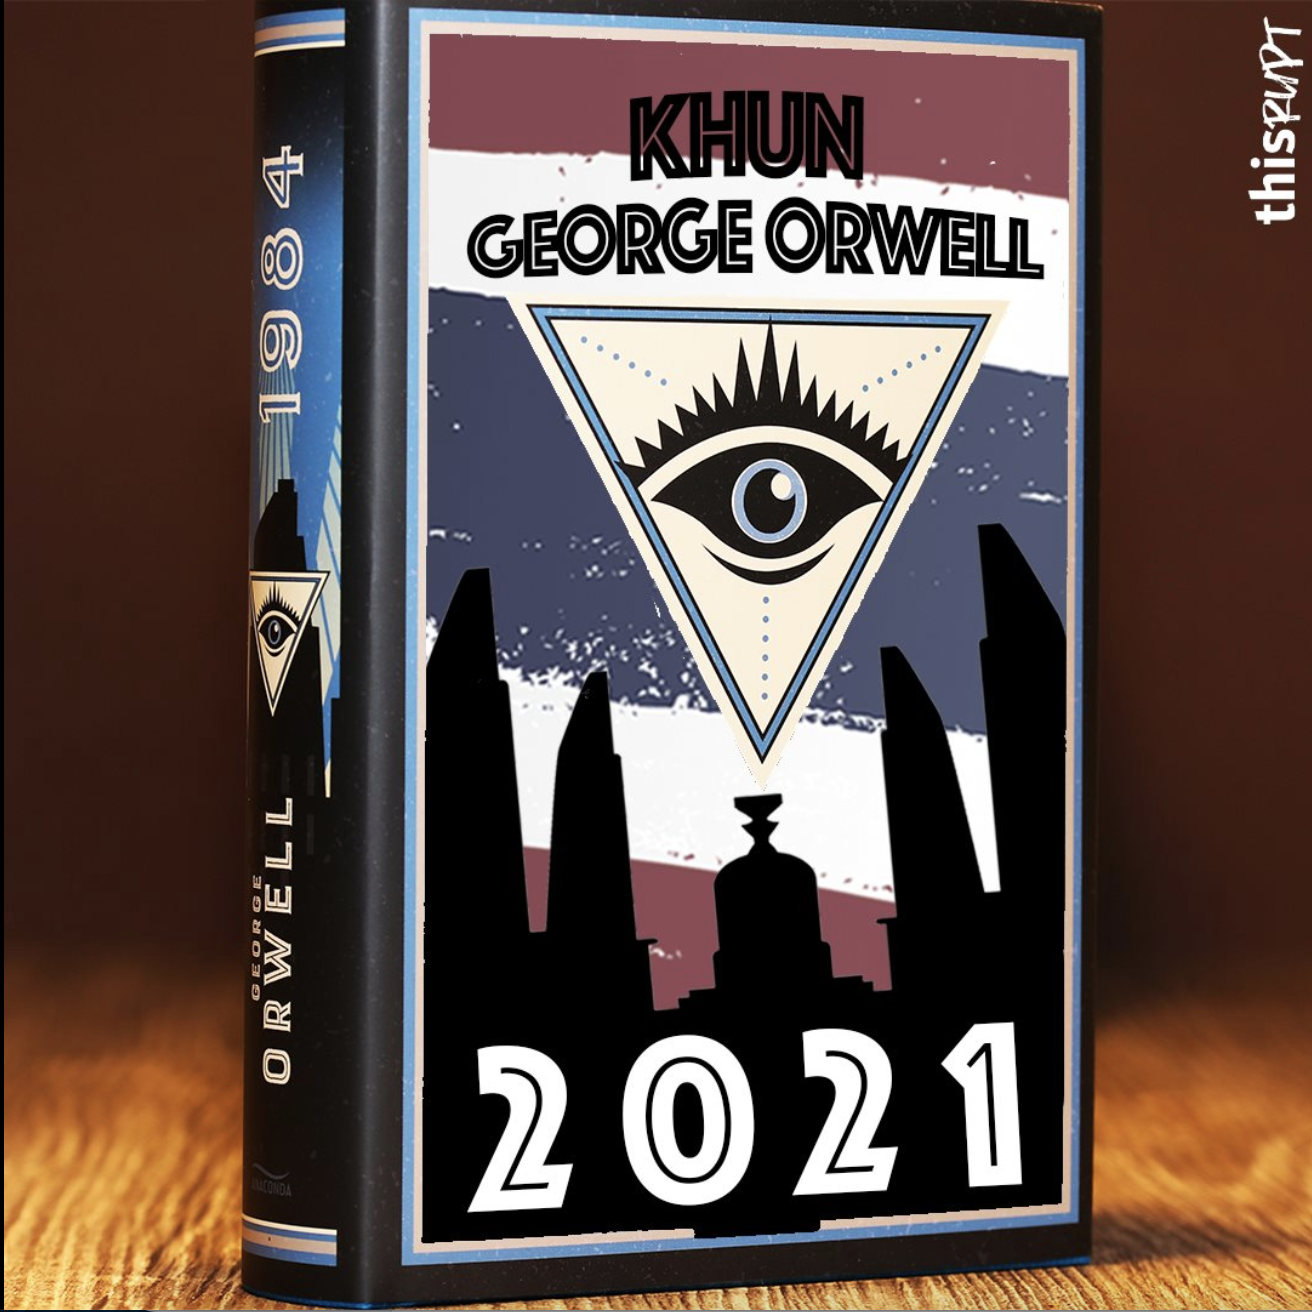 “Blimey, this country has got more than enough materials for a new book,” George Orwell